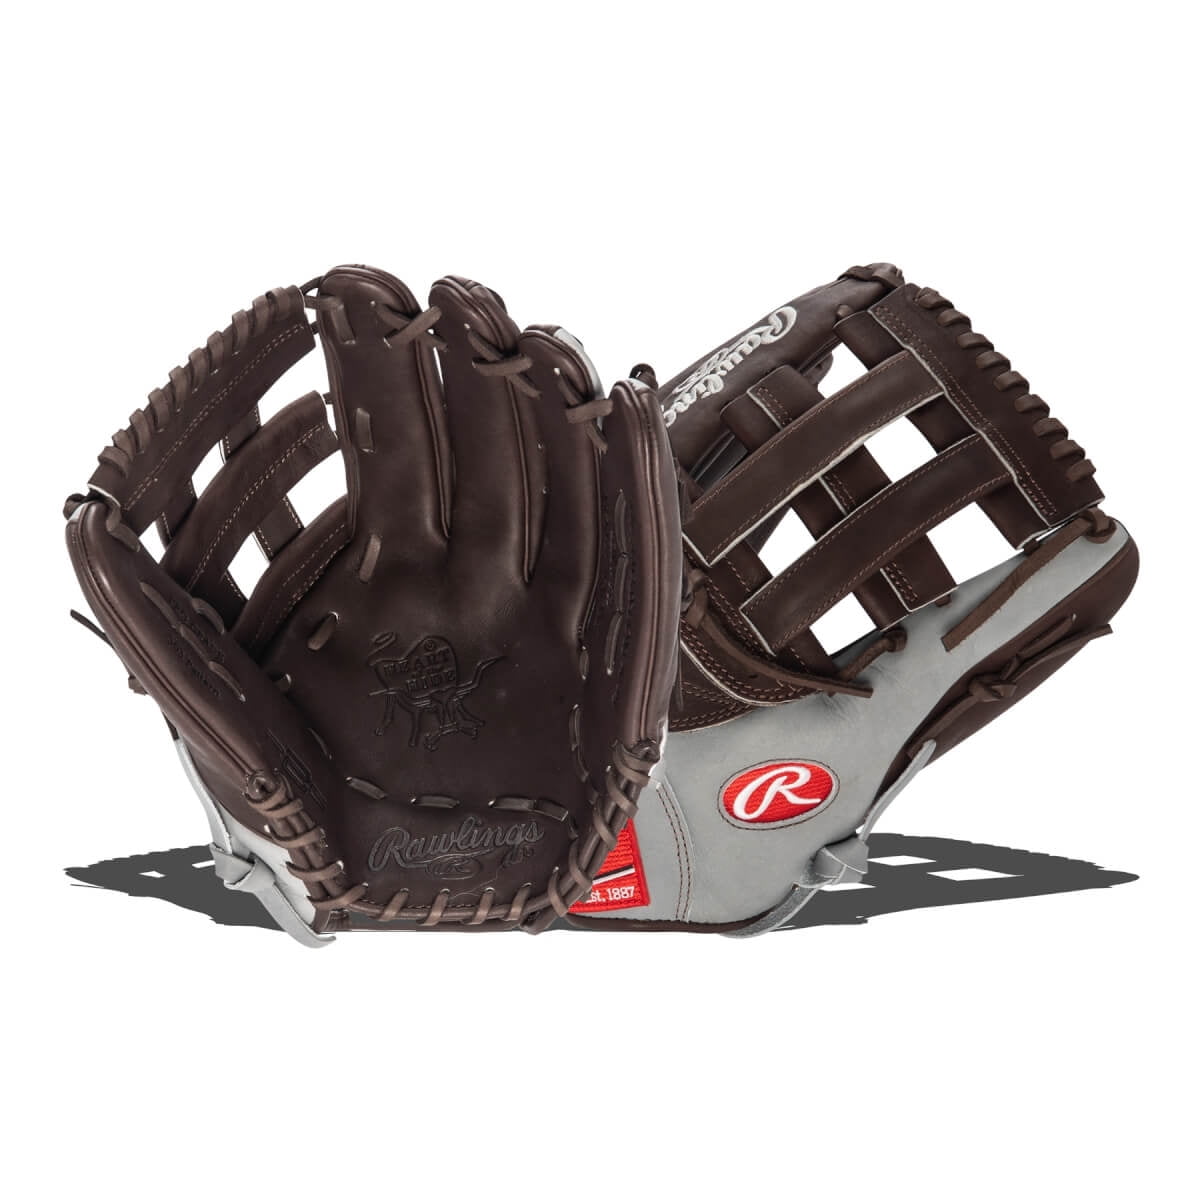 Rawlings Heart of The Hide R2G Speed Shell 12.75 Baseball Glove PROR3039-6GSS PROR3039-6GSS Right Hand Thrower 